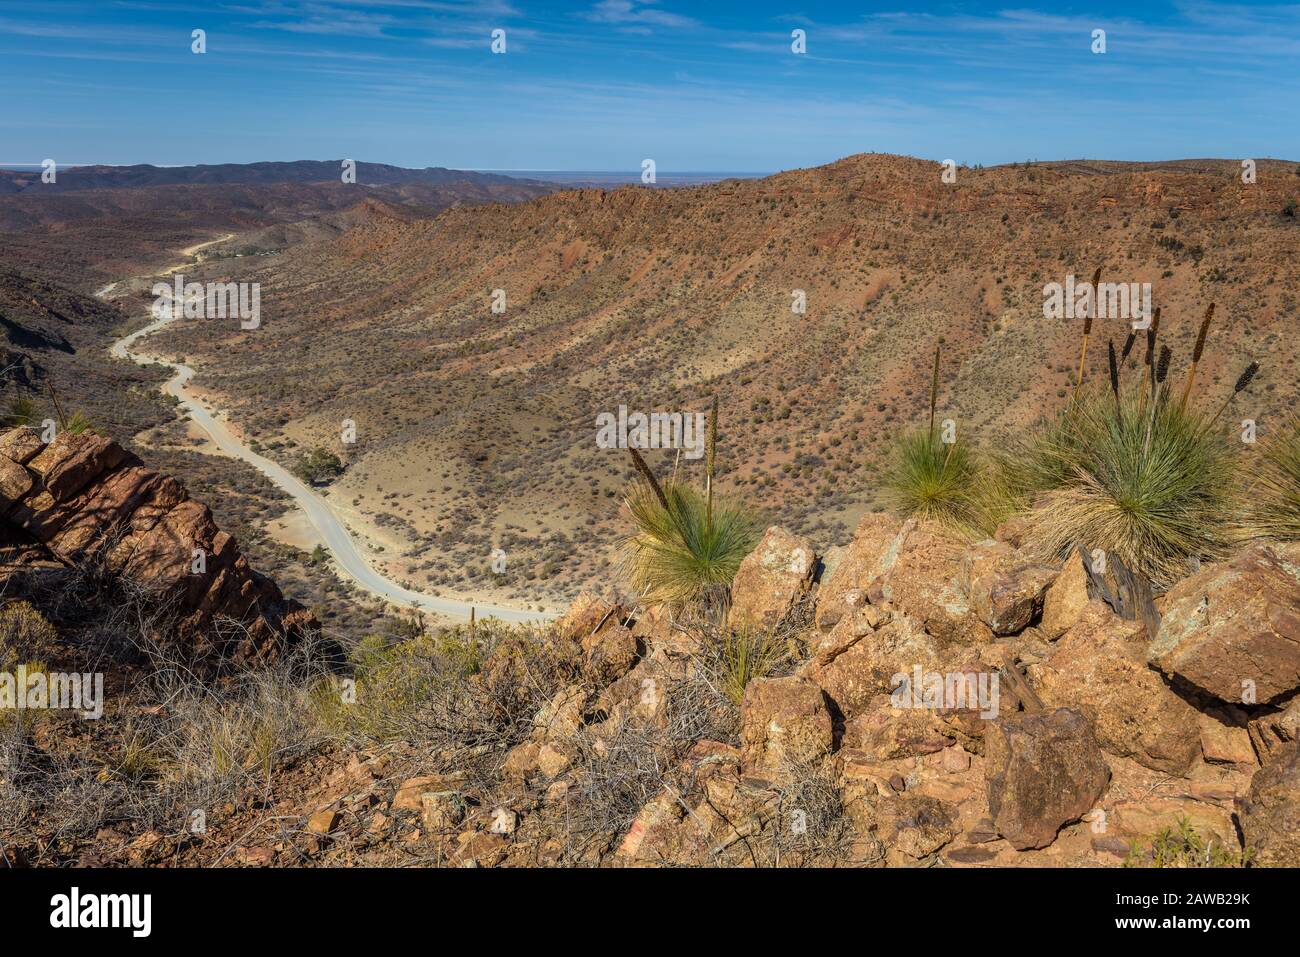 Ridge-top scenic view along the Gammon Range with the snaking dirt road winding its way through the valley into Arkaroola, South Australia. Stock Photo